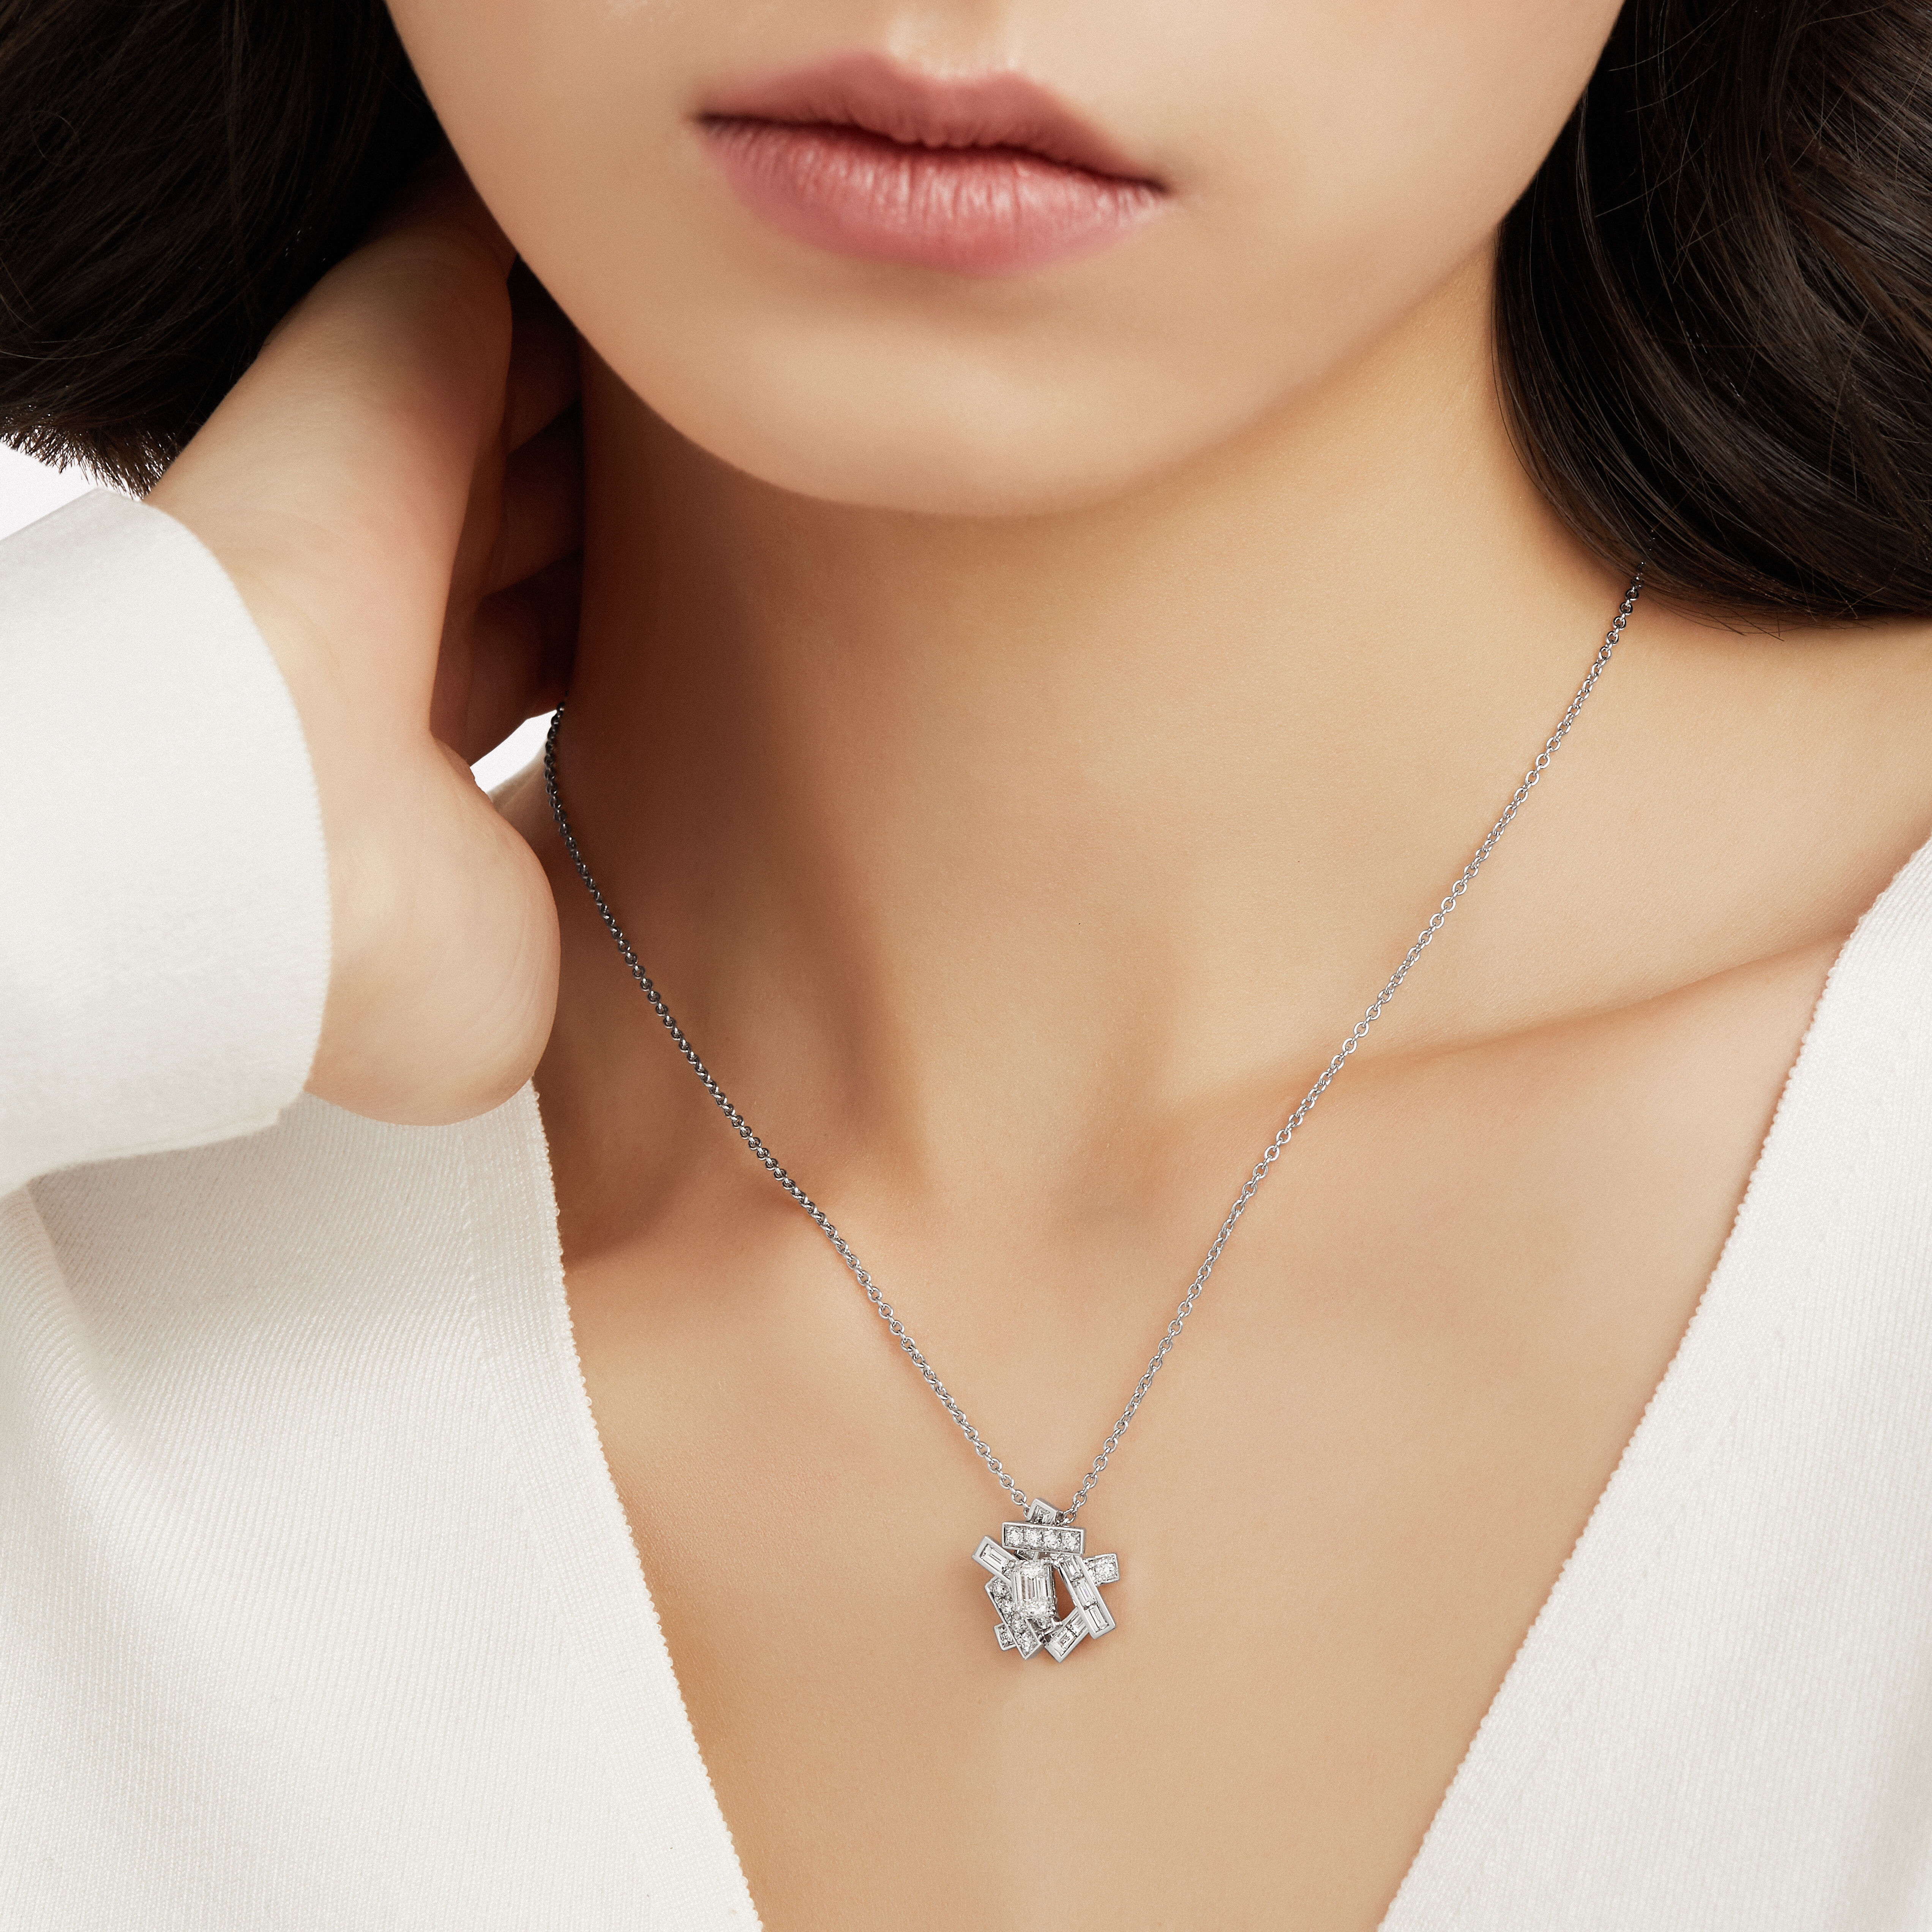 East West Set Emerald Cut Diamond Solitaire Pendant & Necklace Made With  Platinum Gift for Her, Anniversary Gift Necklace for Women - Etsy